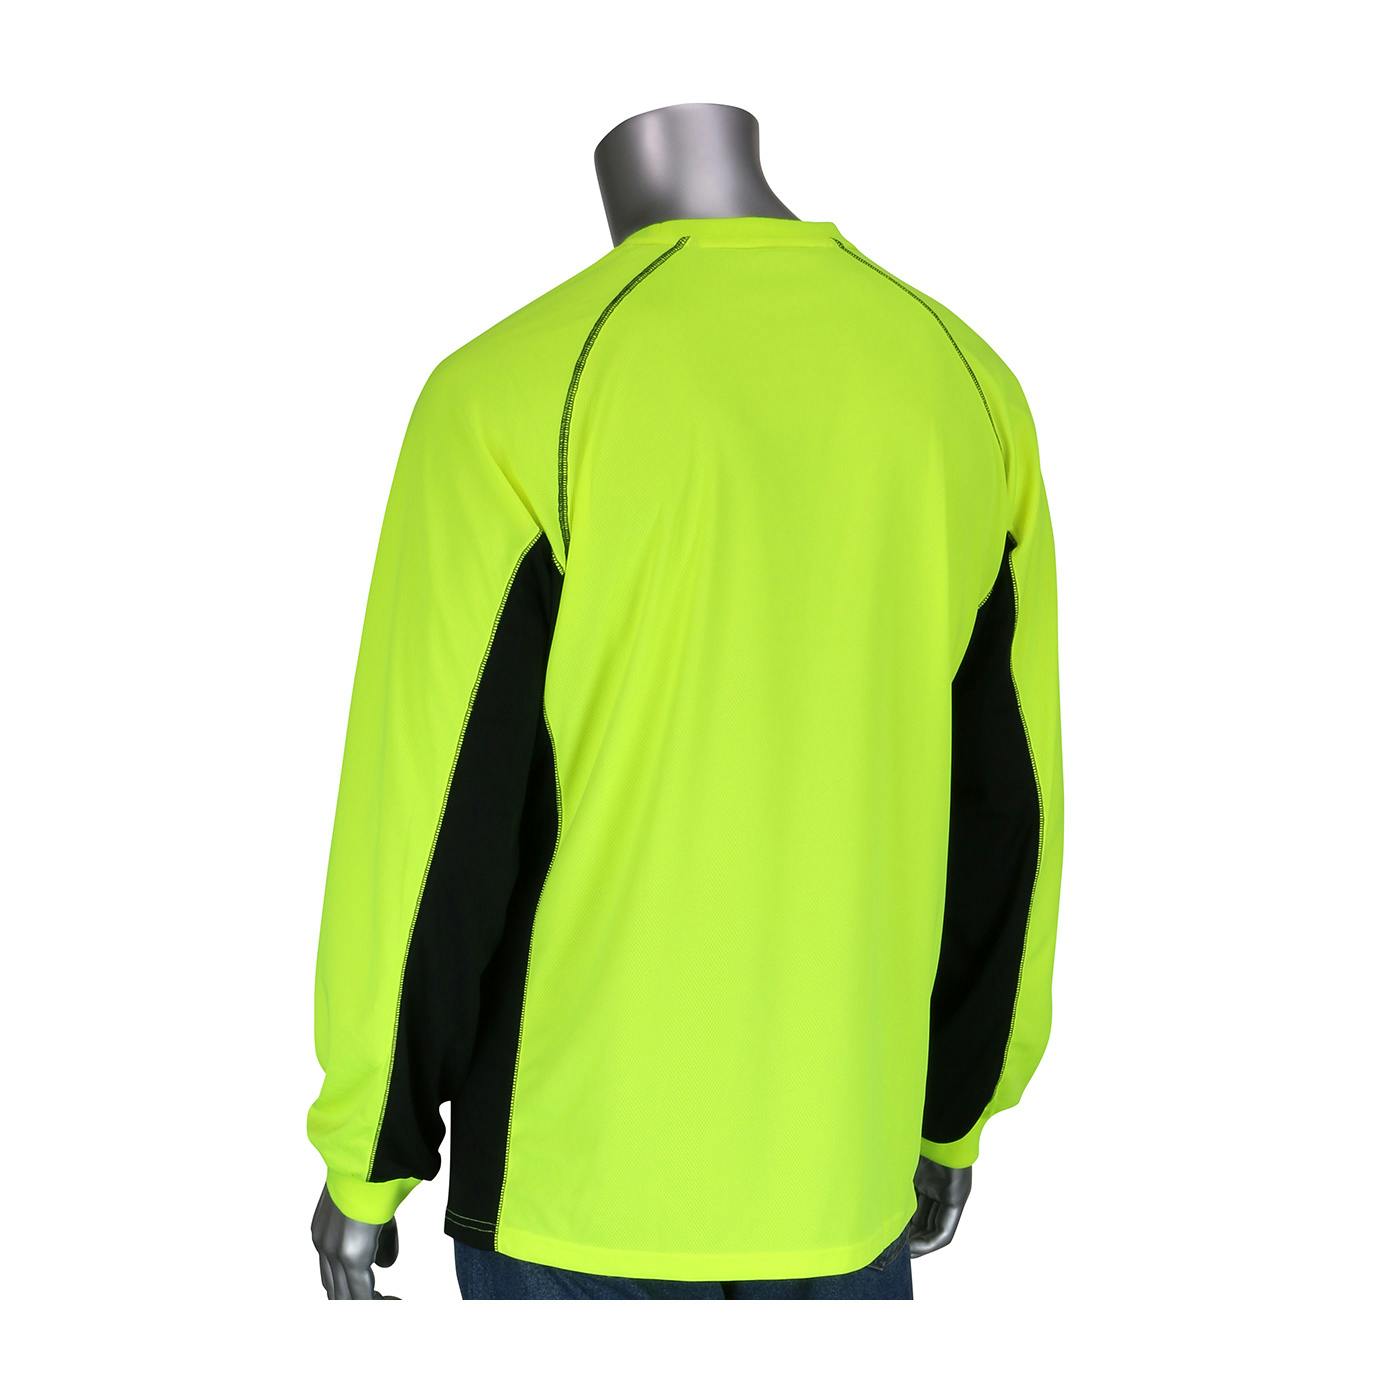 Non-ANSI Long Sleeve T-Shirt with 50+ UPF Sun Protection, Insect Repellent Treatment and Black Trim, Hi-Vis Yellow (310-1150B)